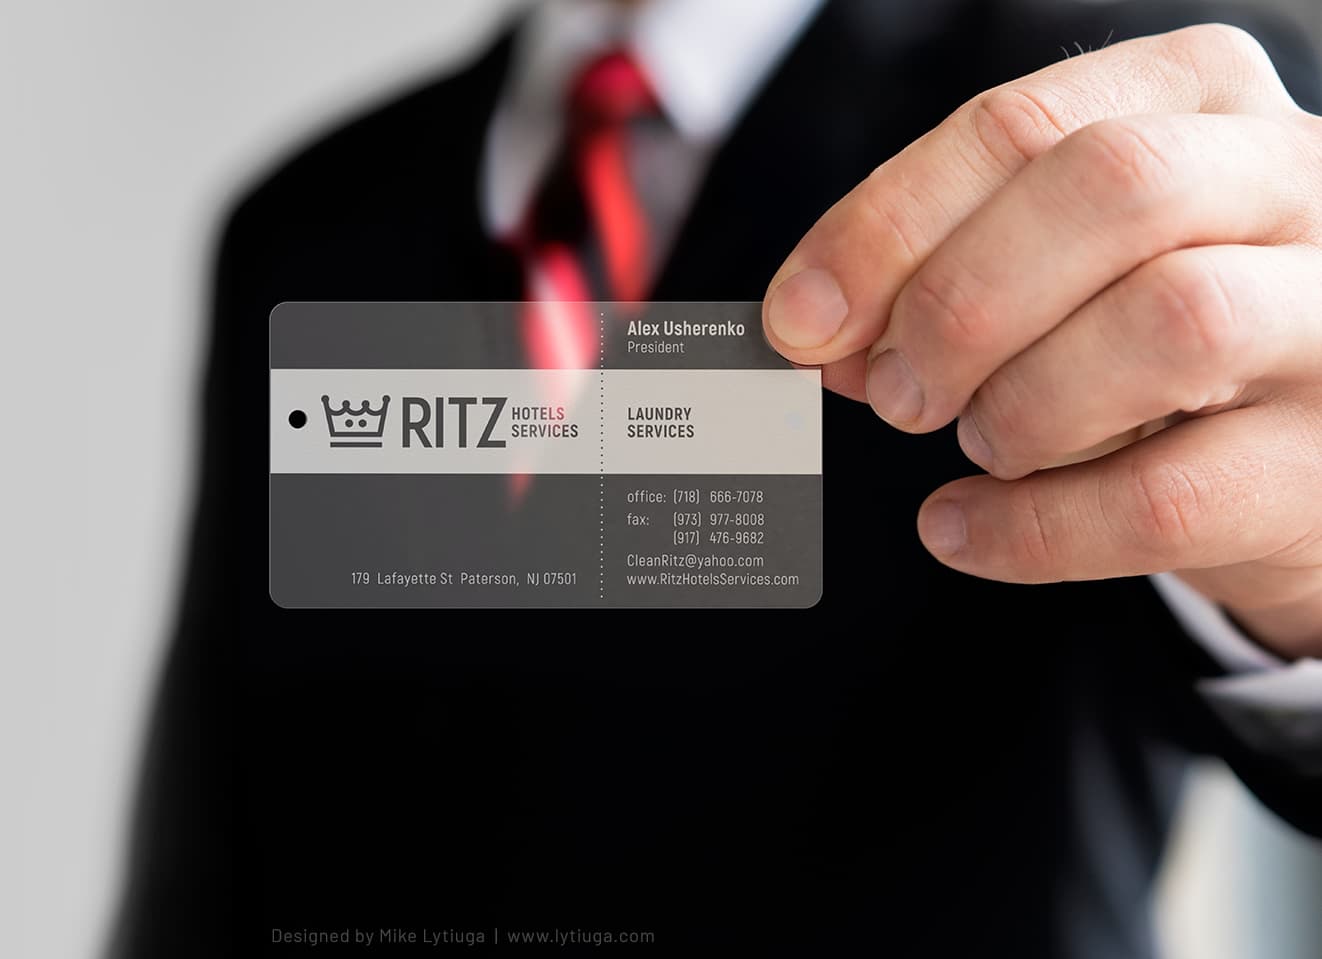 Translucent business card design for RITZ Hotels Services